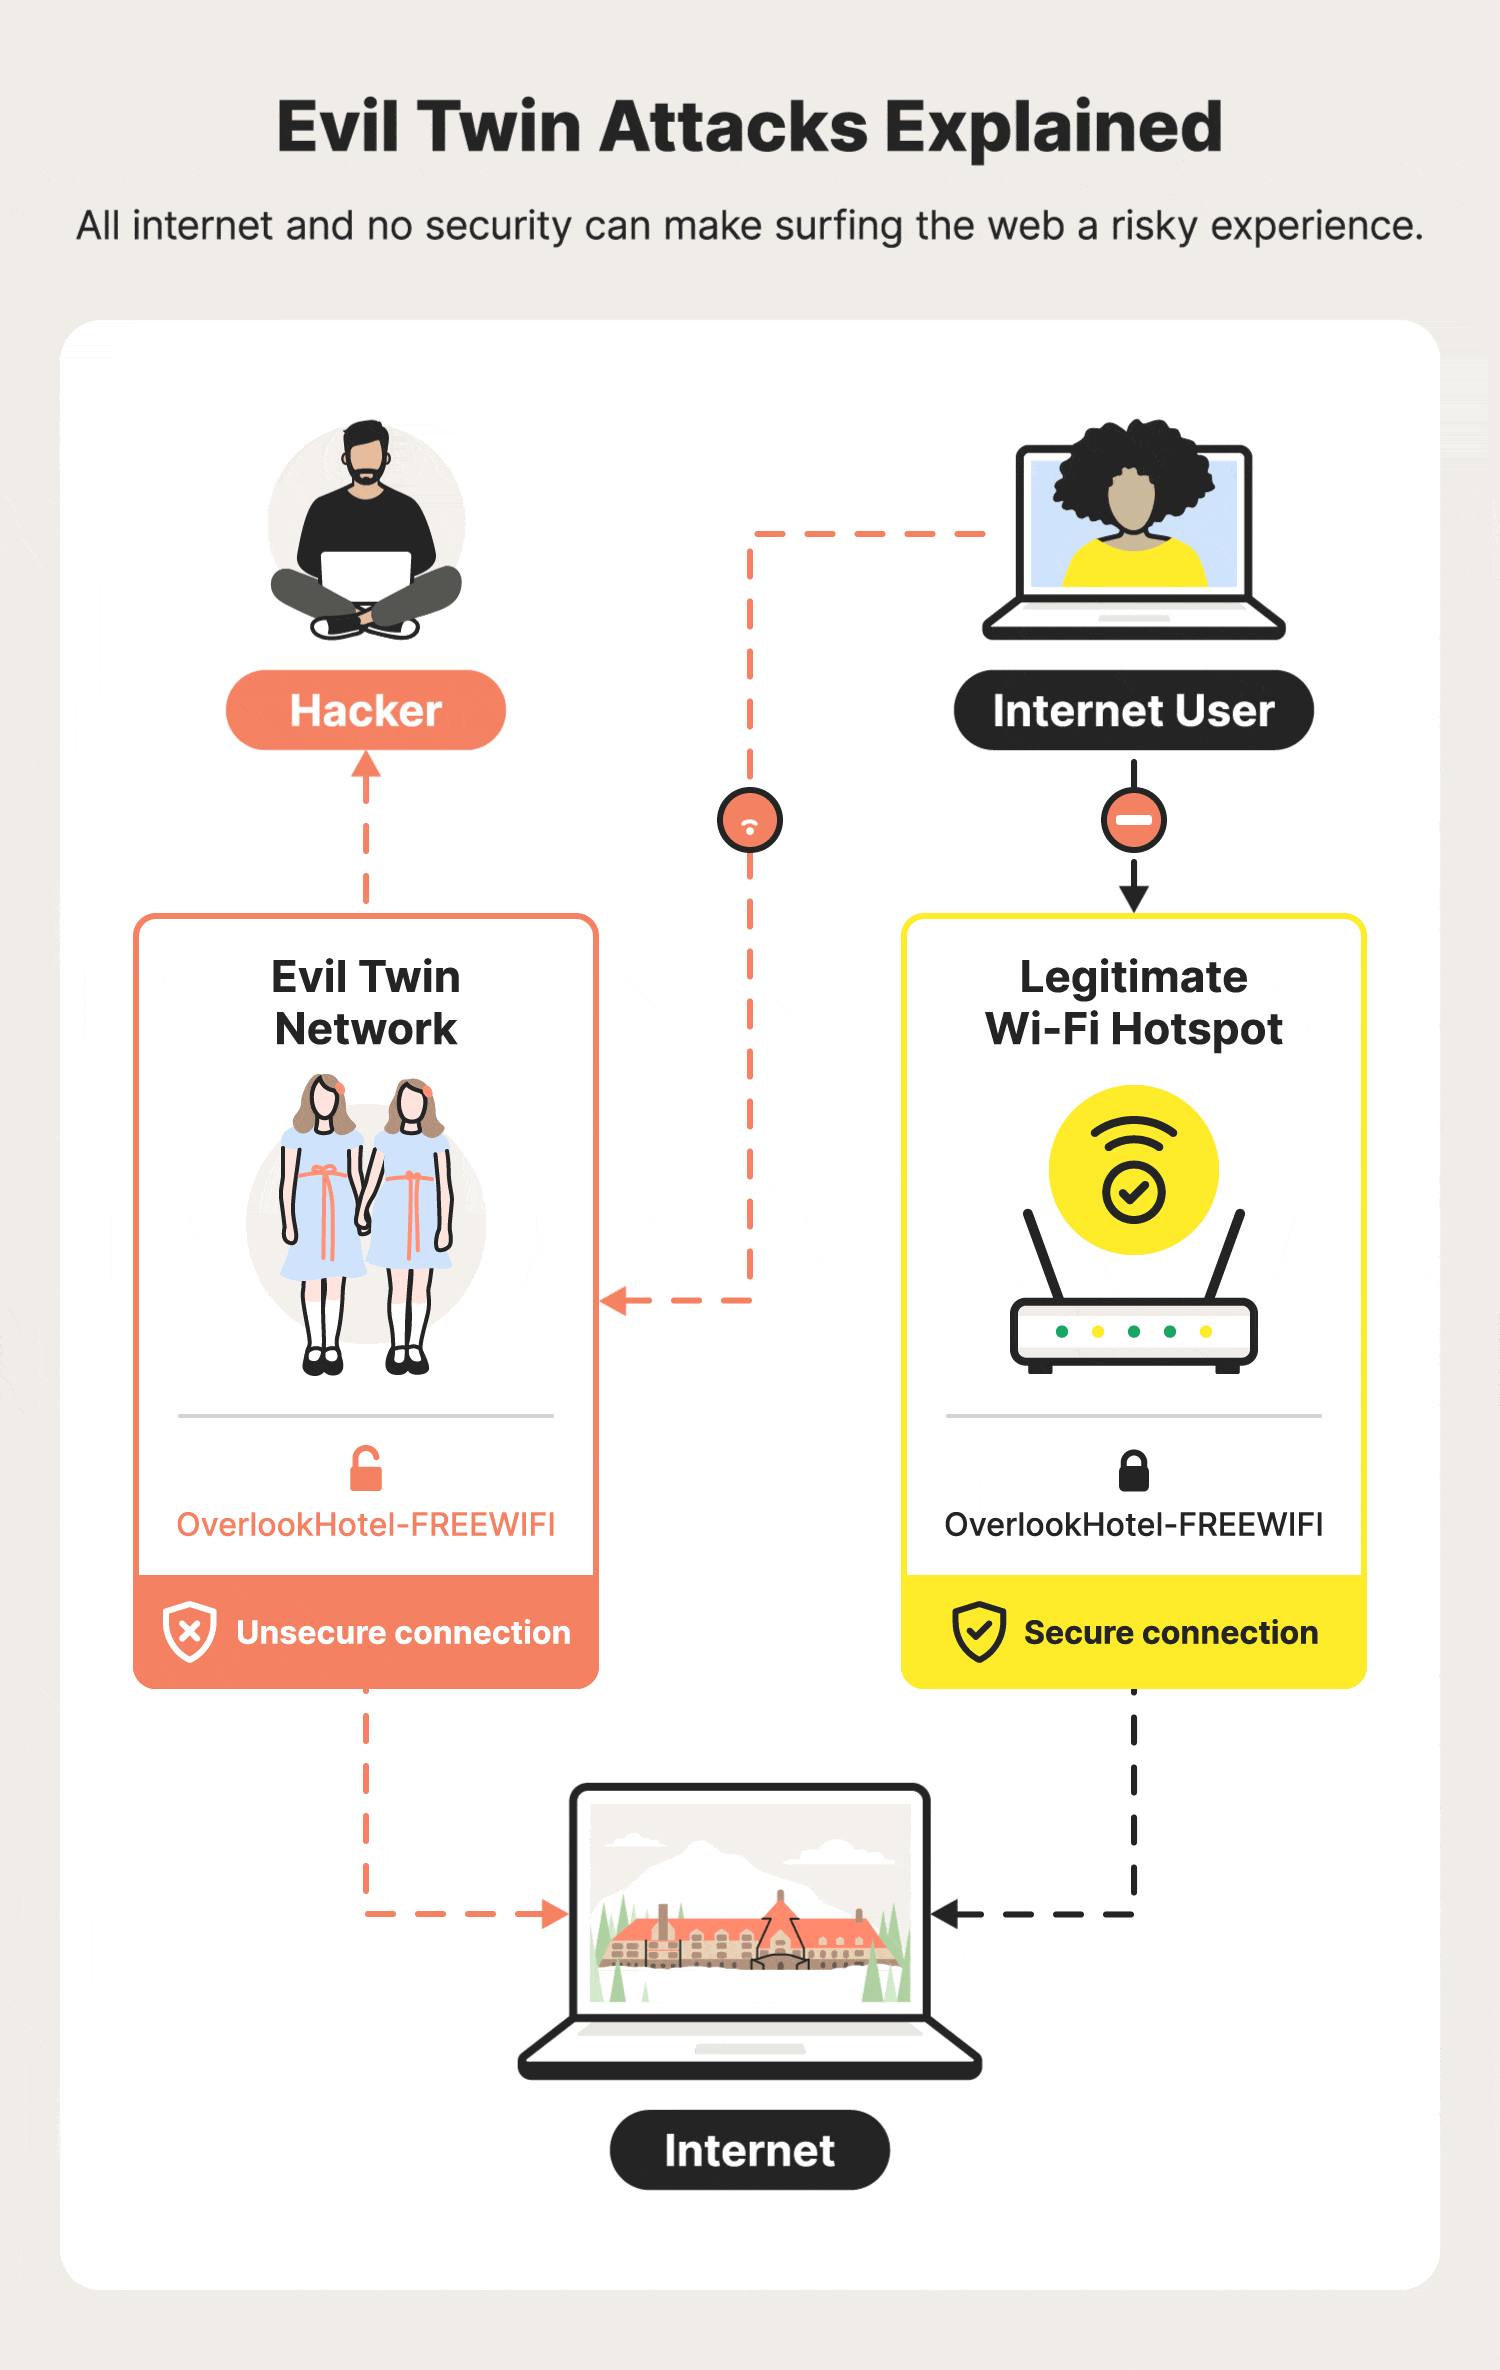 A graphic explains how an evil twin attack works.